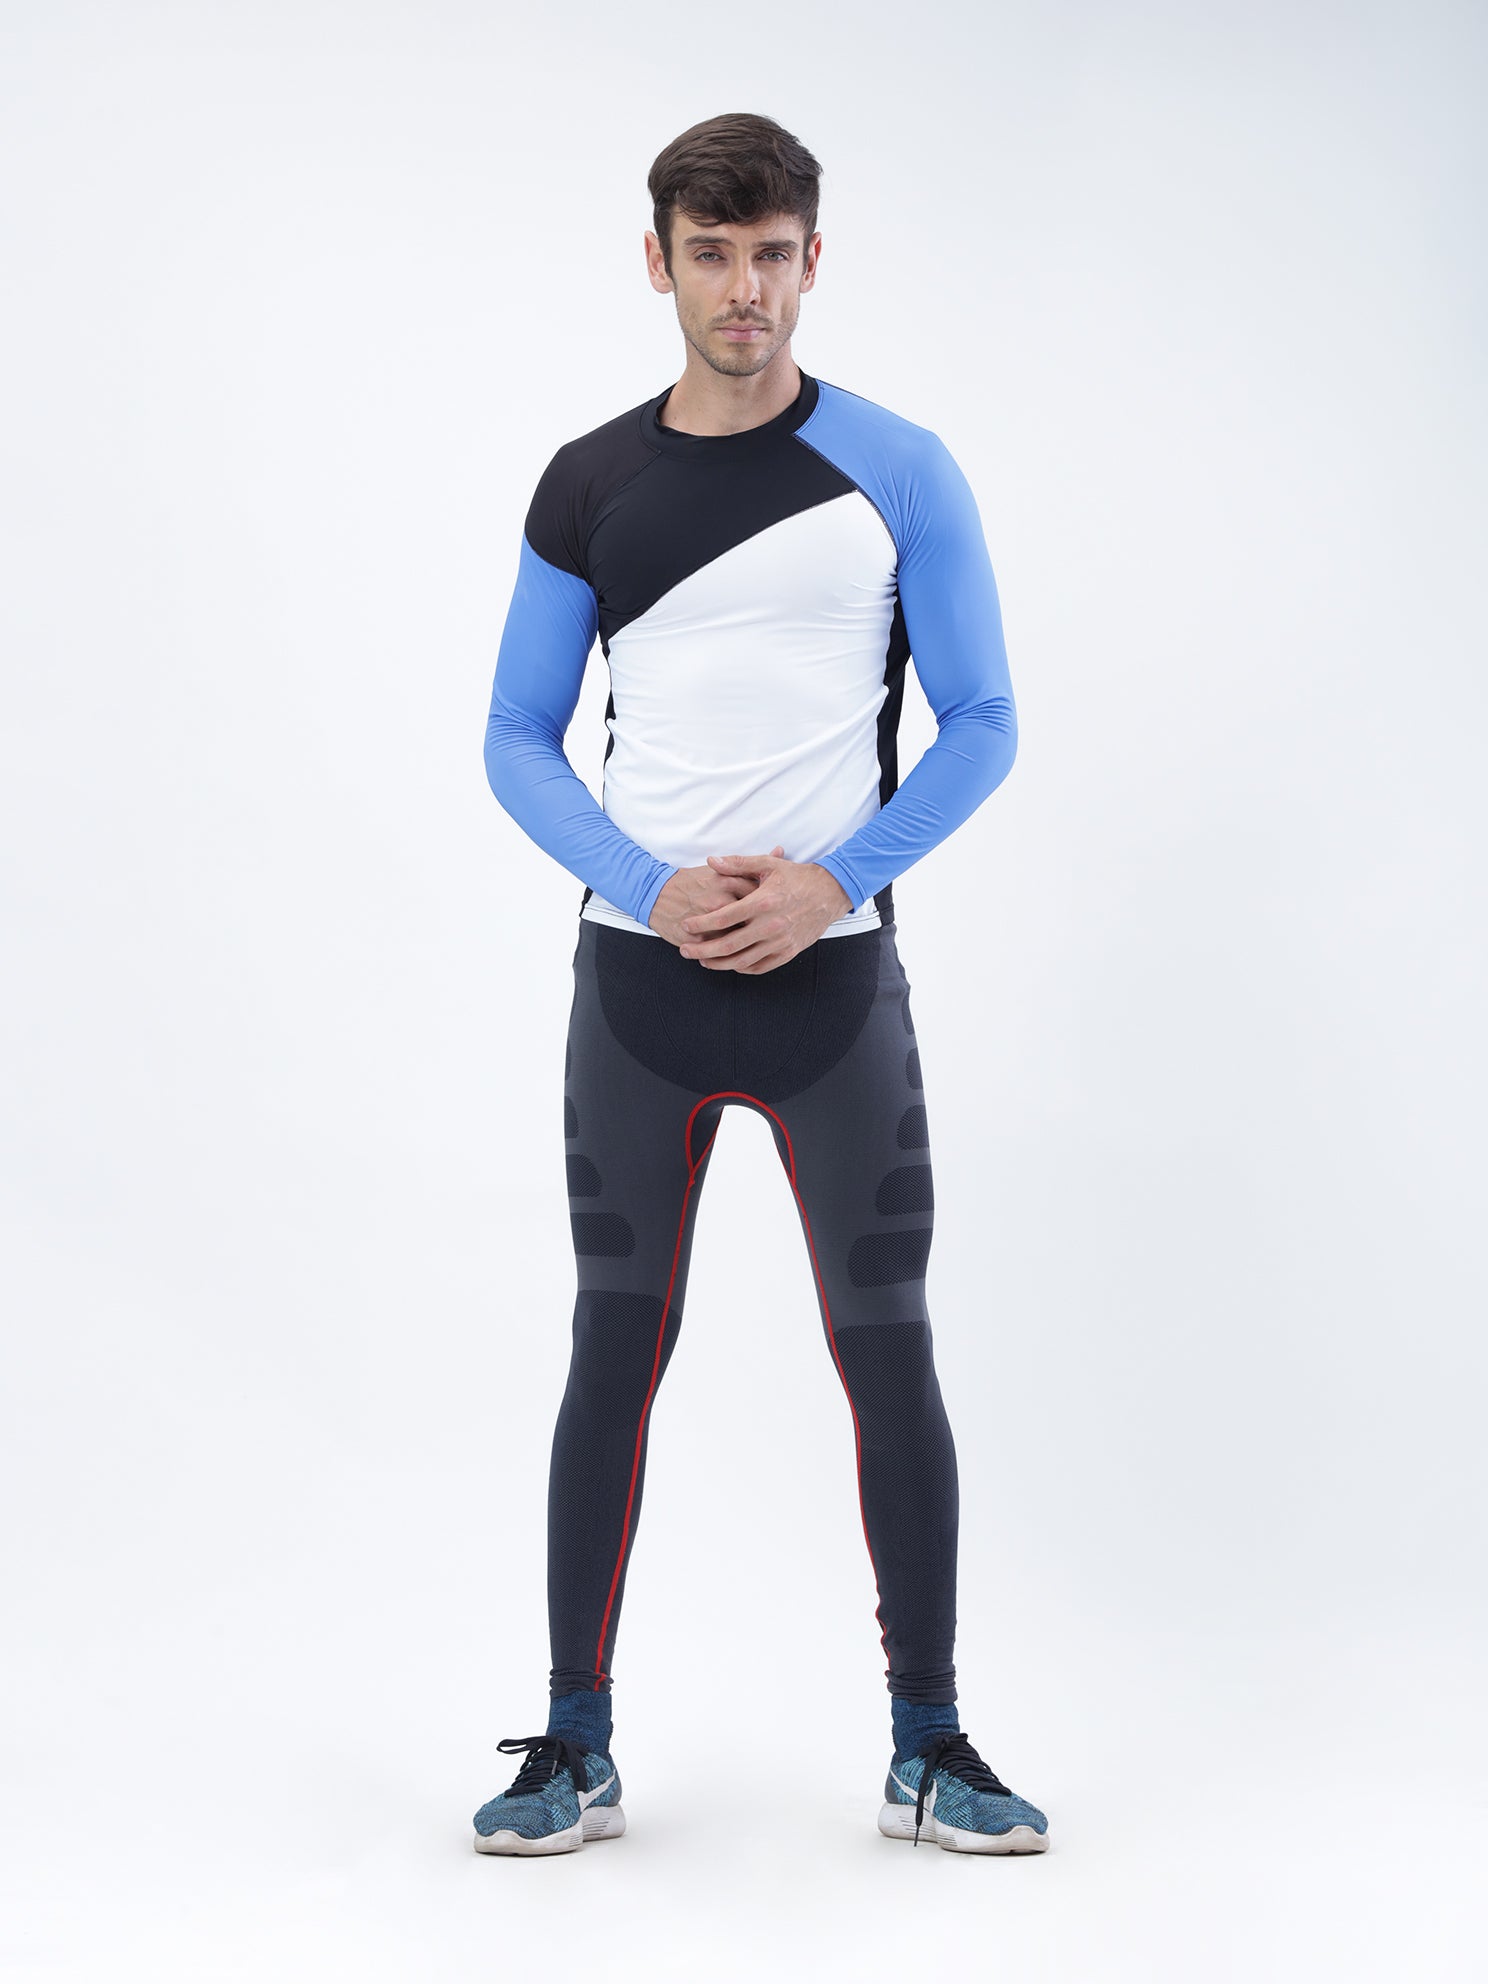 Full sleeve compression top - BlueWave - Zebo Active Wear